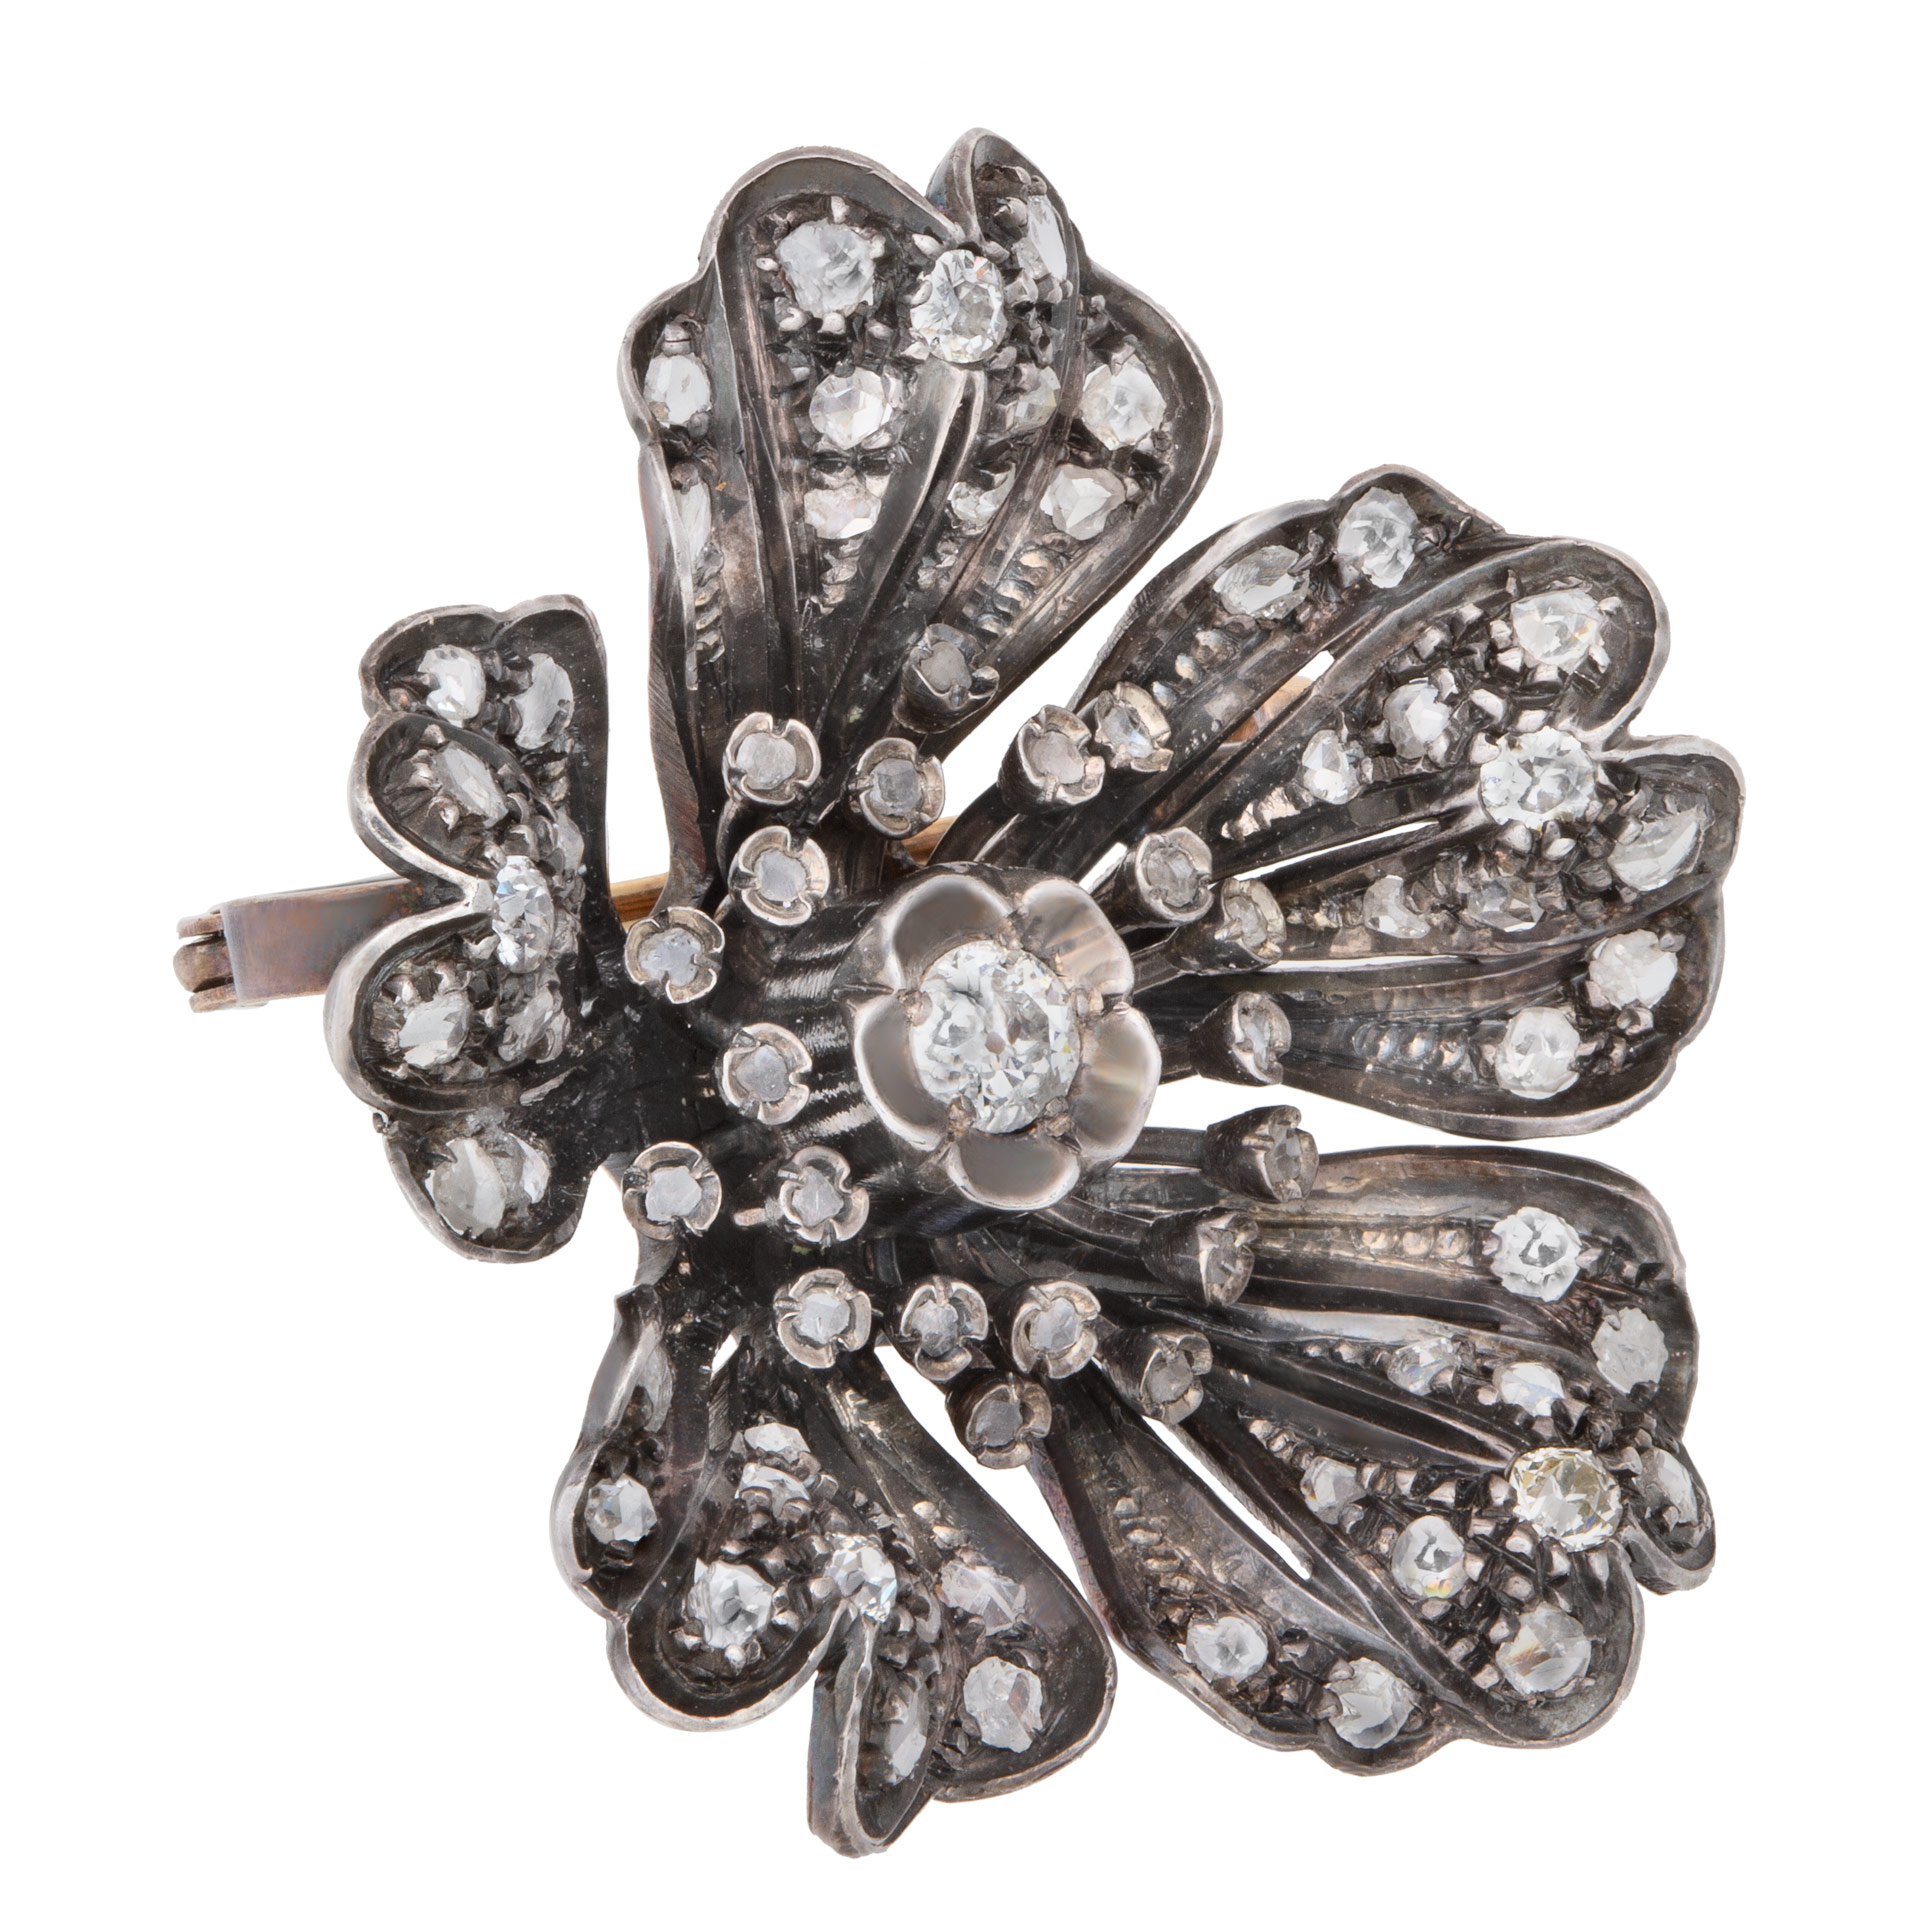 VIcorian brooch, pendant with approx. 2.00 carats old mine cut diamonds, set in sliver top and gold. image 2